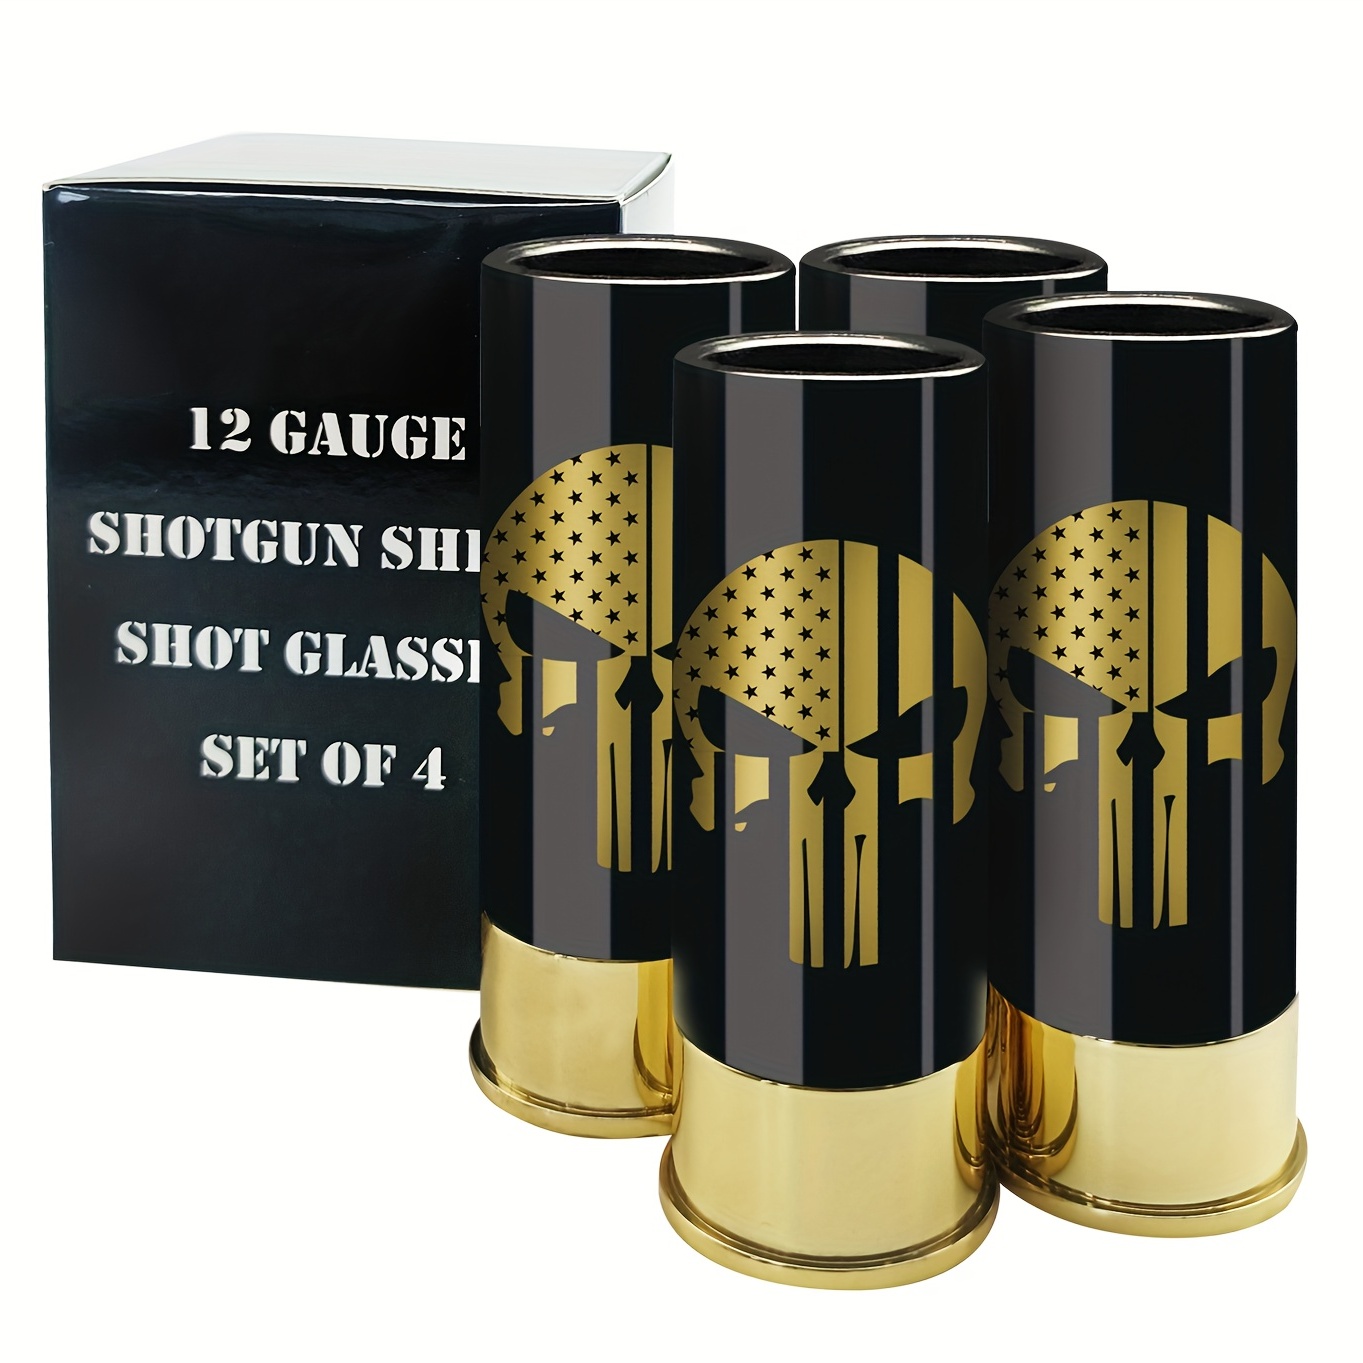 Creative 3D Bullet Shell Cup Shaped Cup Novelty Ceramic Cup Vodka Cocktail  Mixing Glasses